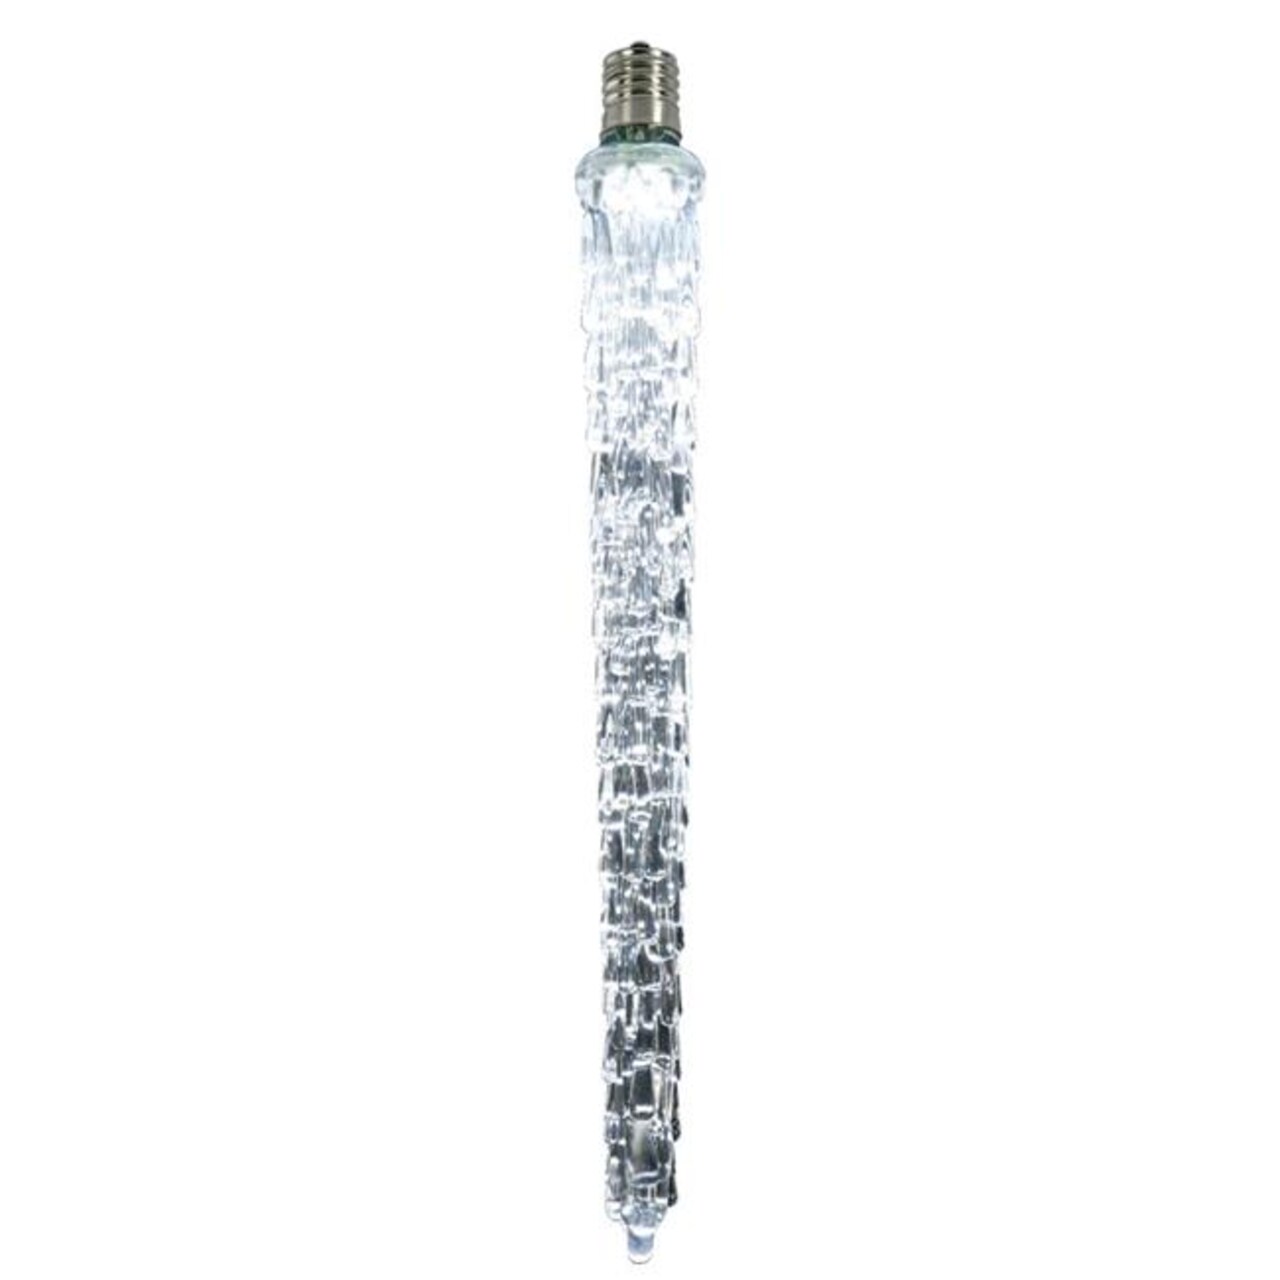 E17 Falling Icicle Bulb with Cool White LED Lights - 18 in.